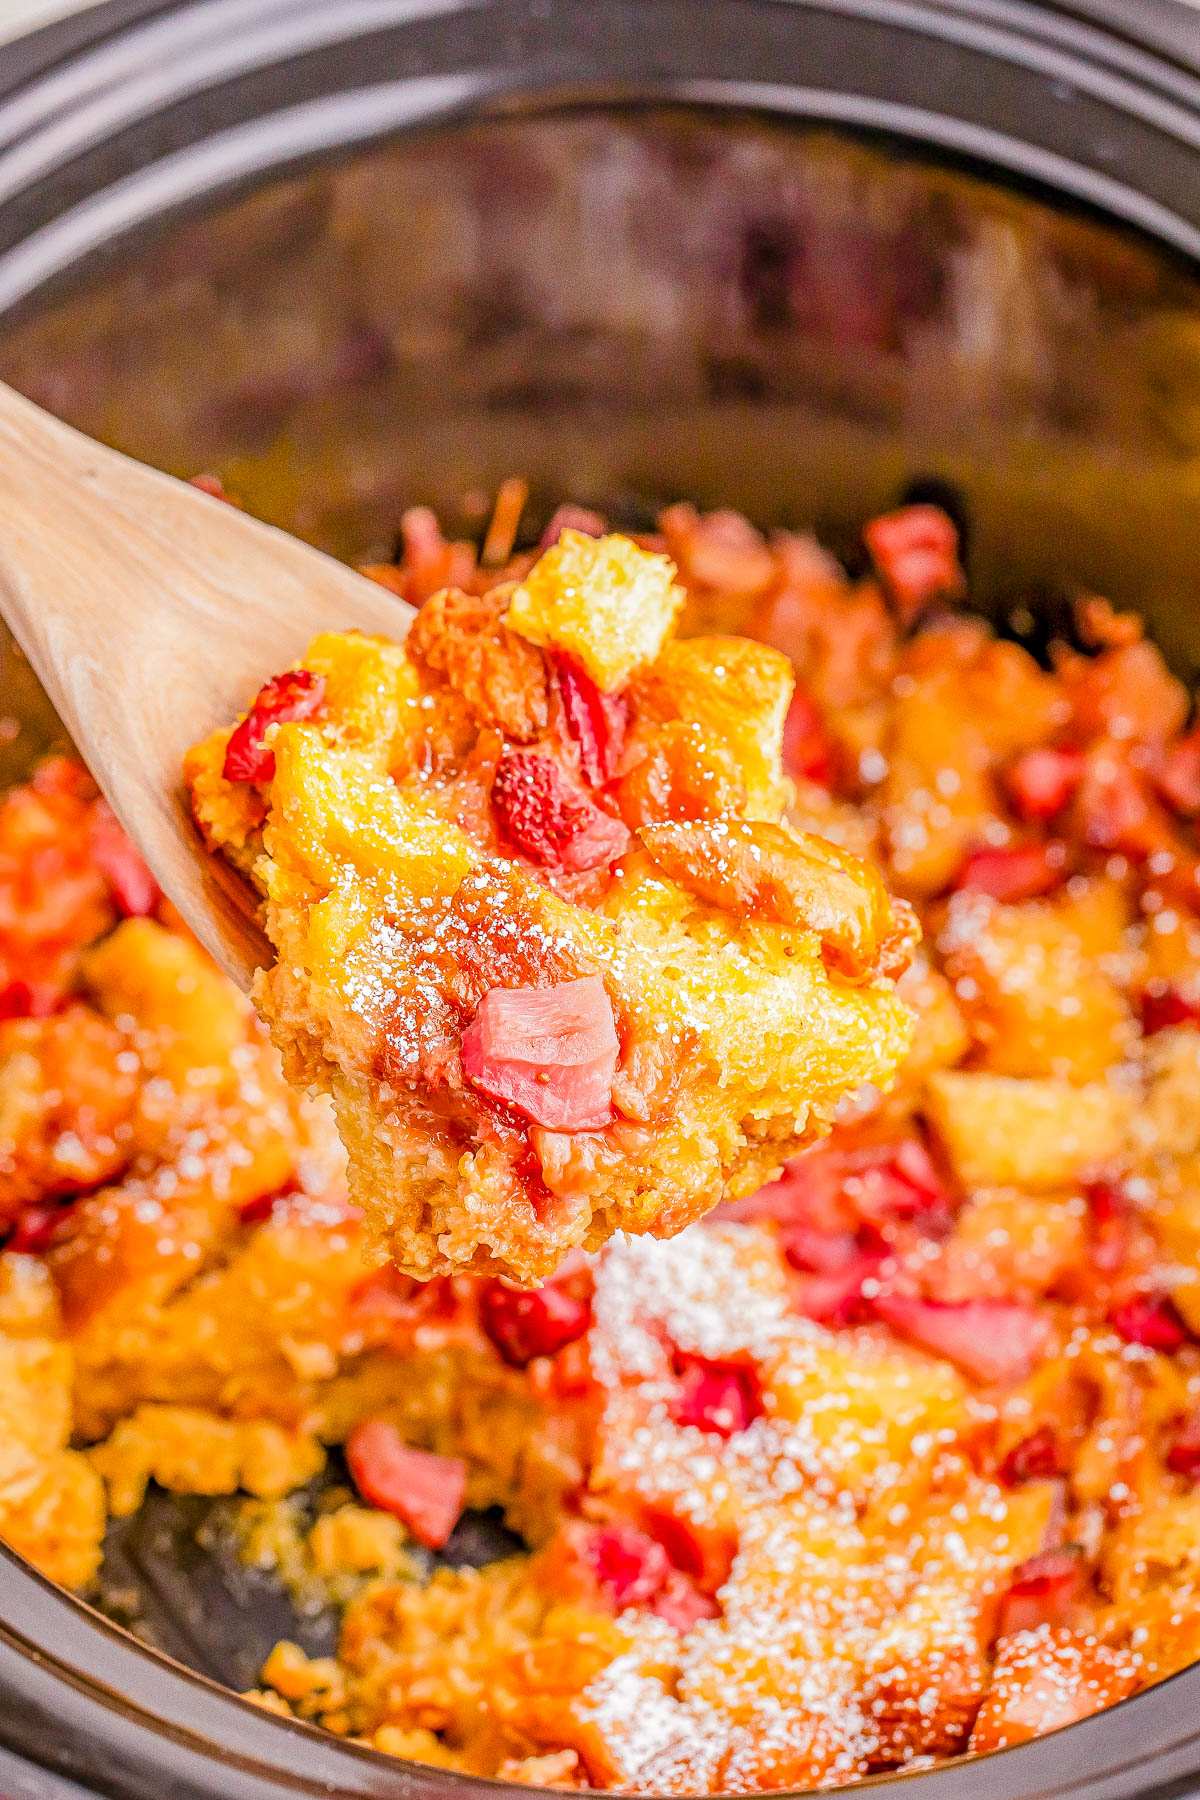 A spoon lifts a serving of bread pudding with chunks of ham from a pot, containing a mixture of fruit and dough with visible pieces of ham.